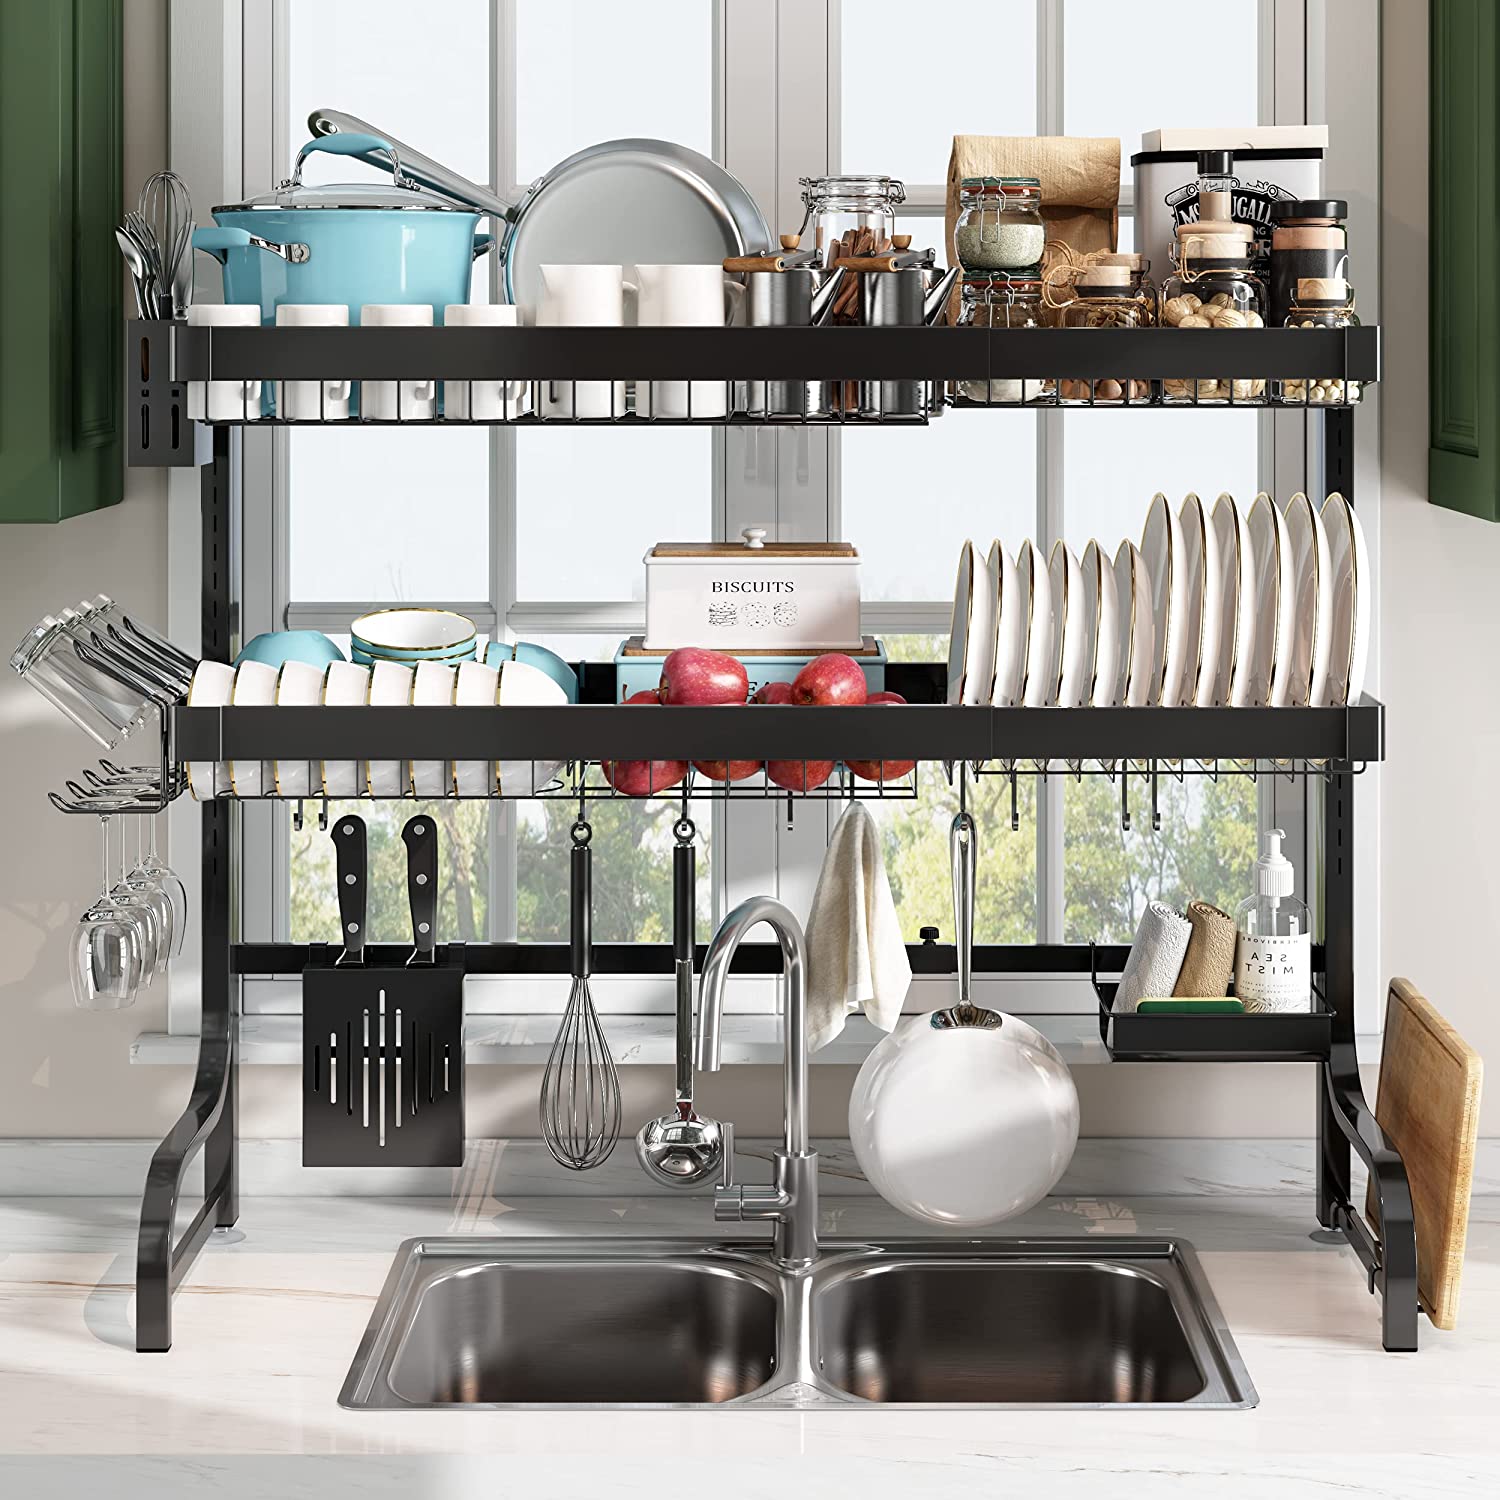  2023 Model，Over The Sink Dish Drying Rack 3-Tier Dish Drying Rack  Over Sink Adjustable Length(26-37.5in), Stainless Steel Dish Drainer, Dishes  Rack Kitchen Pots, pans, dishes and pots Organizer